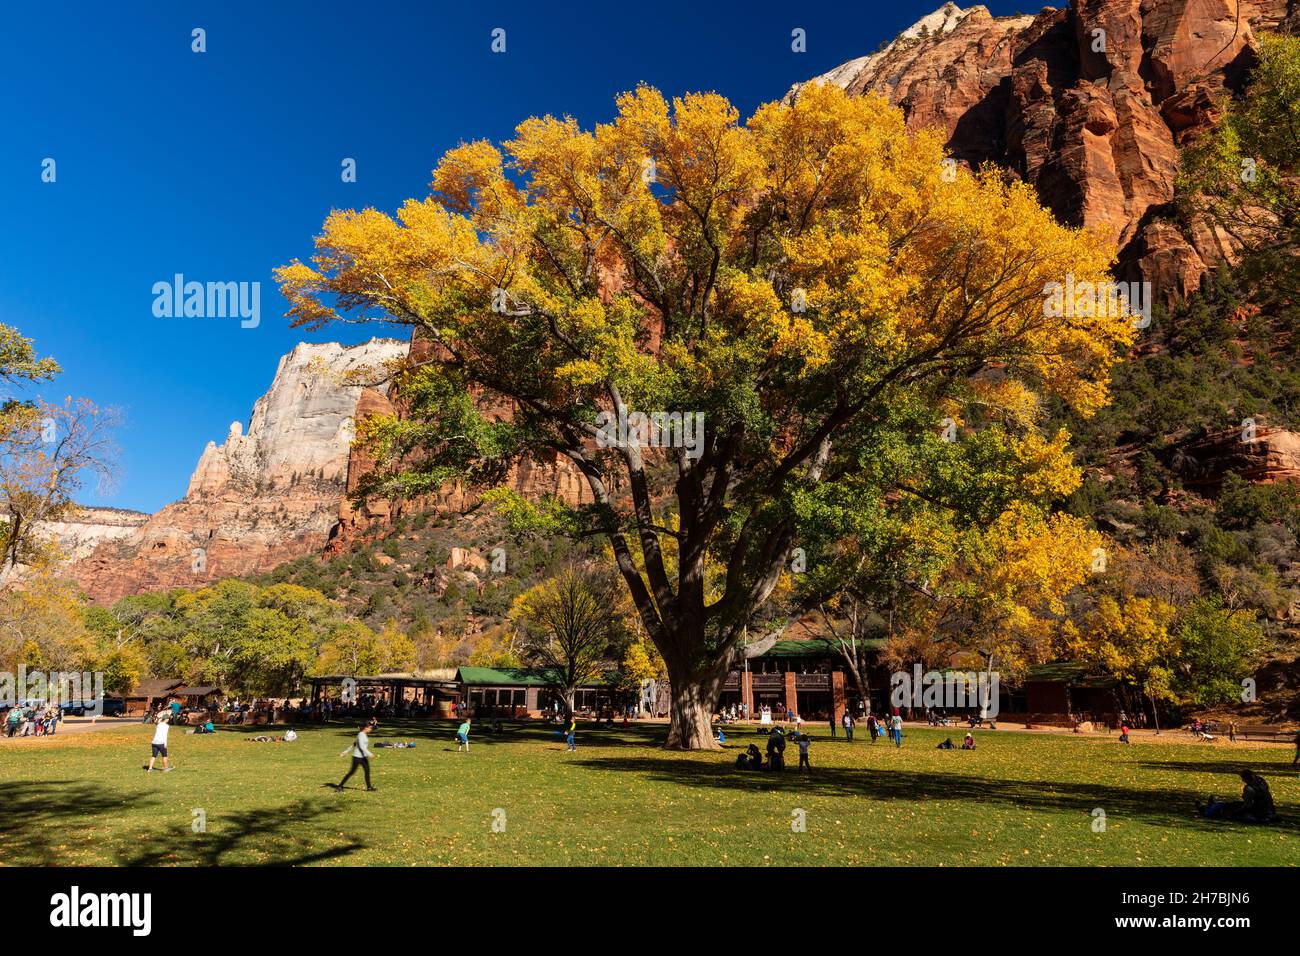 People walking and playing on the grounds of the Zion Lodge in autumn, Zion National Park, Utah Stock Photo